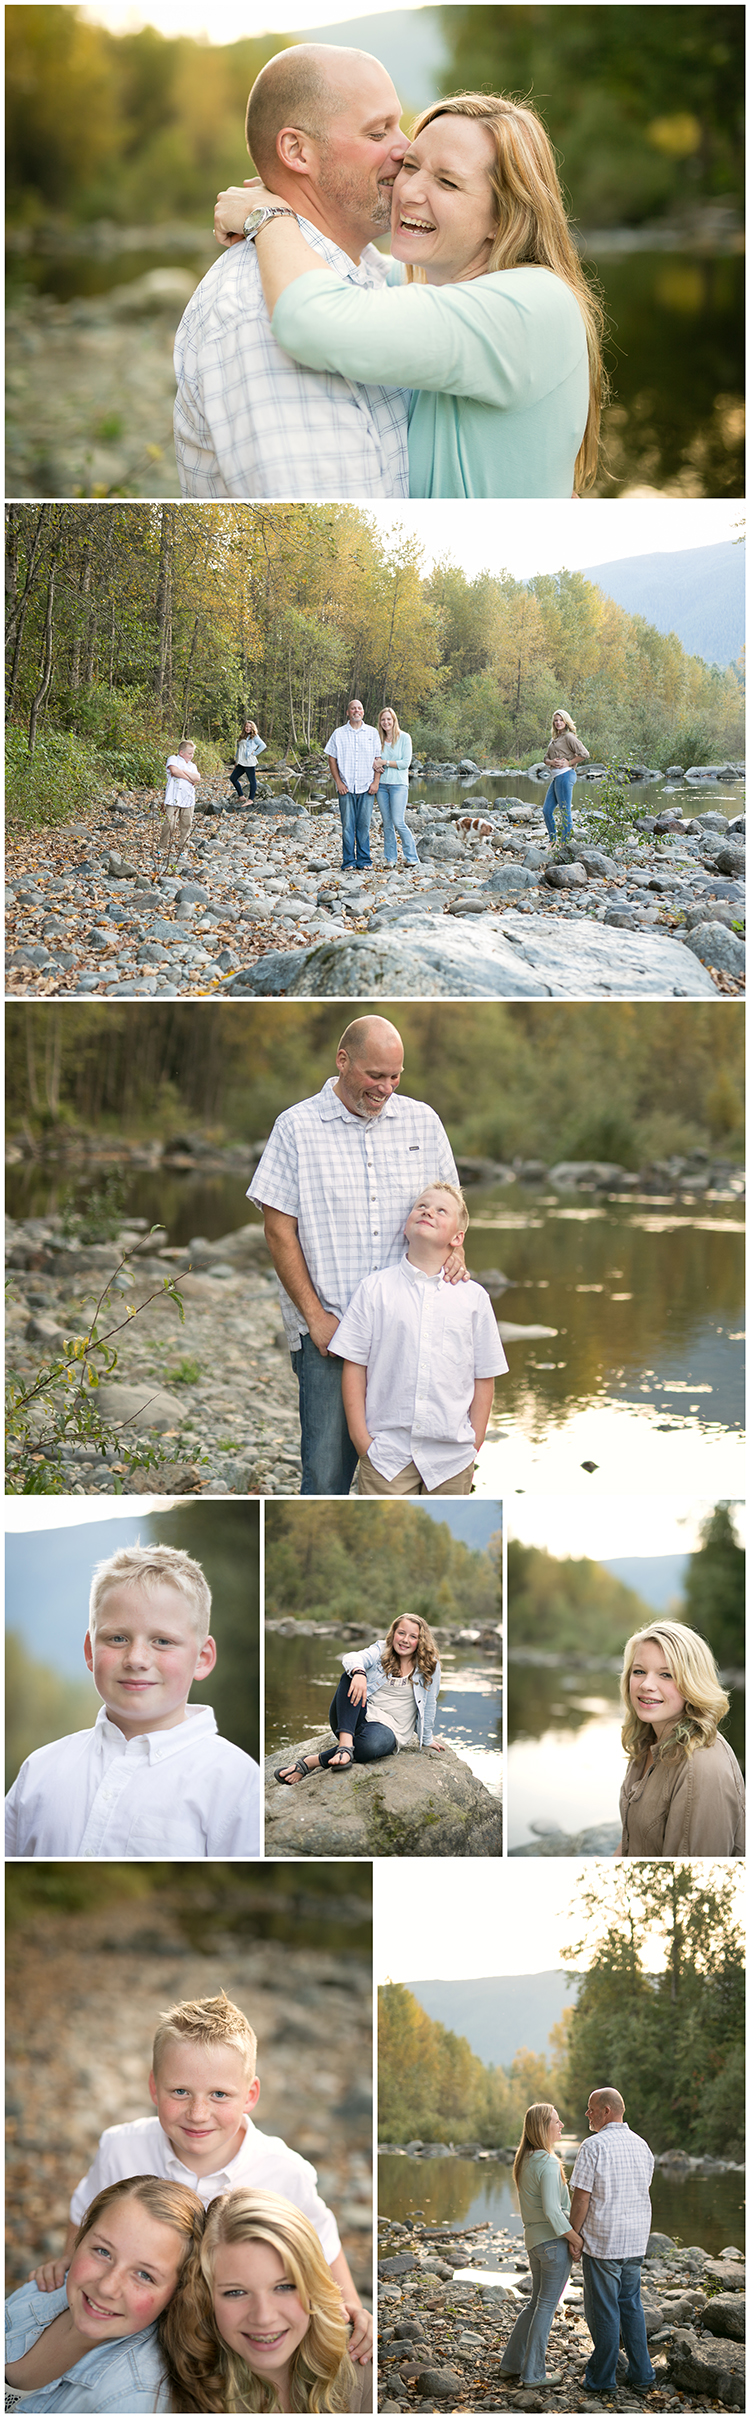 Snoqualmie Valley Photographer {Rusted Van Photography}